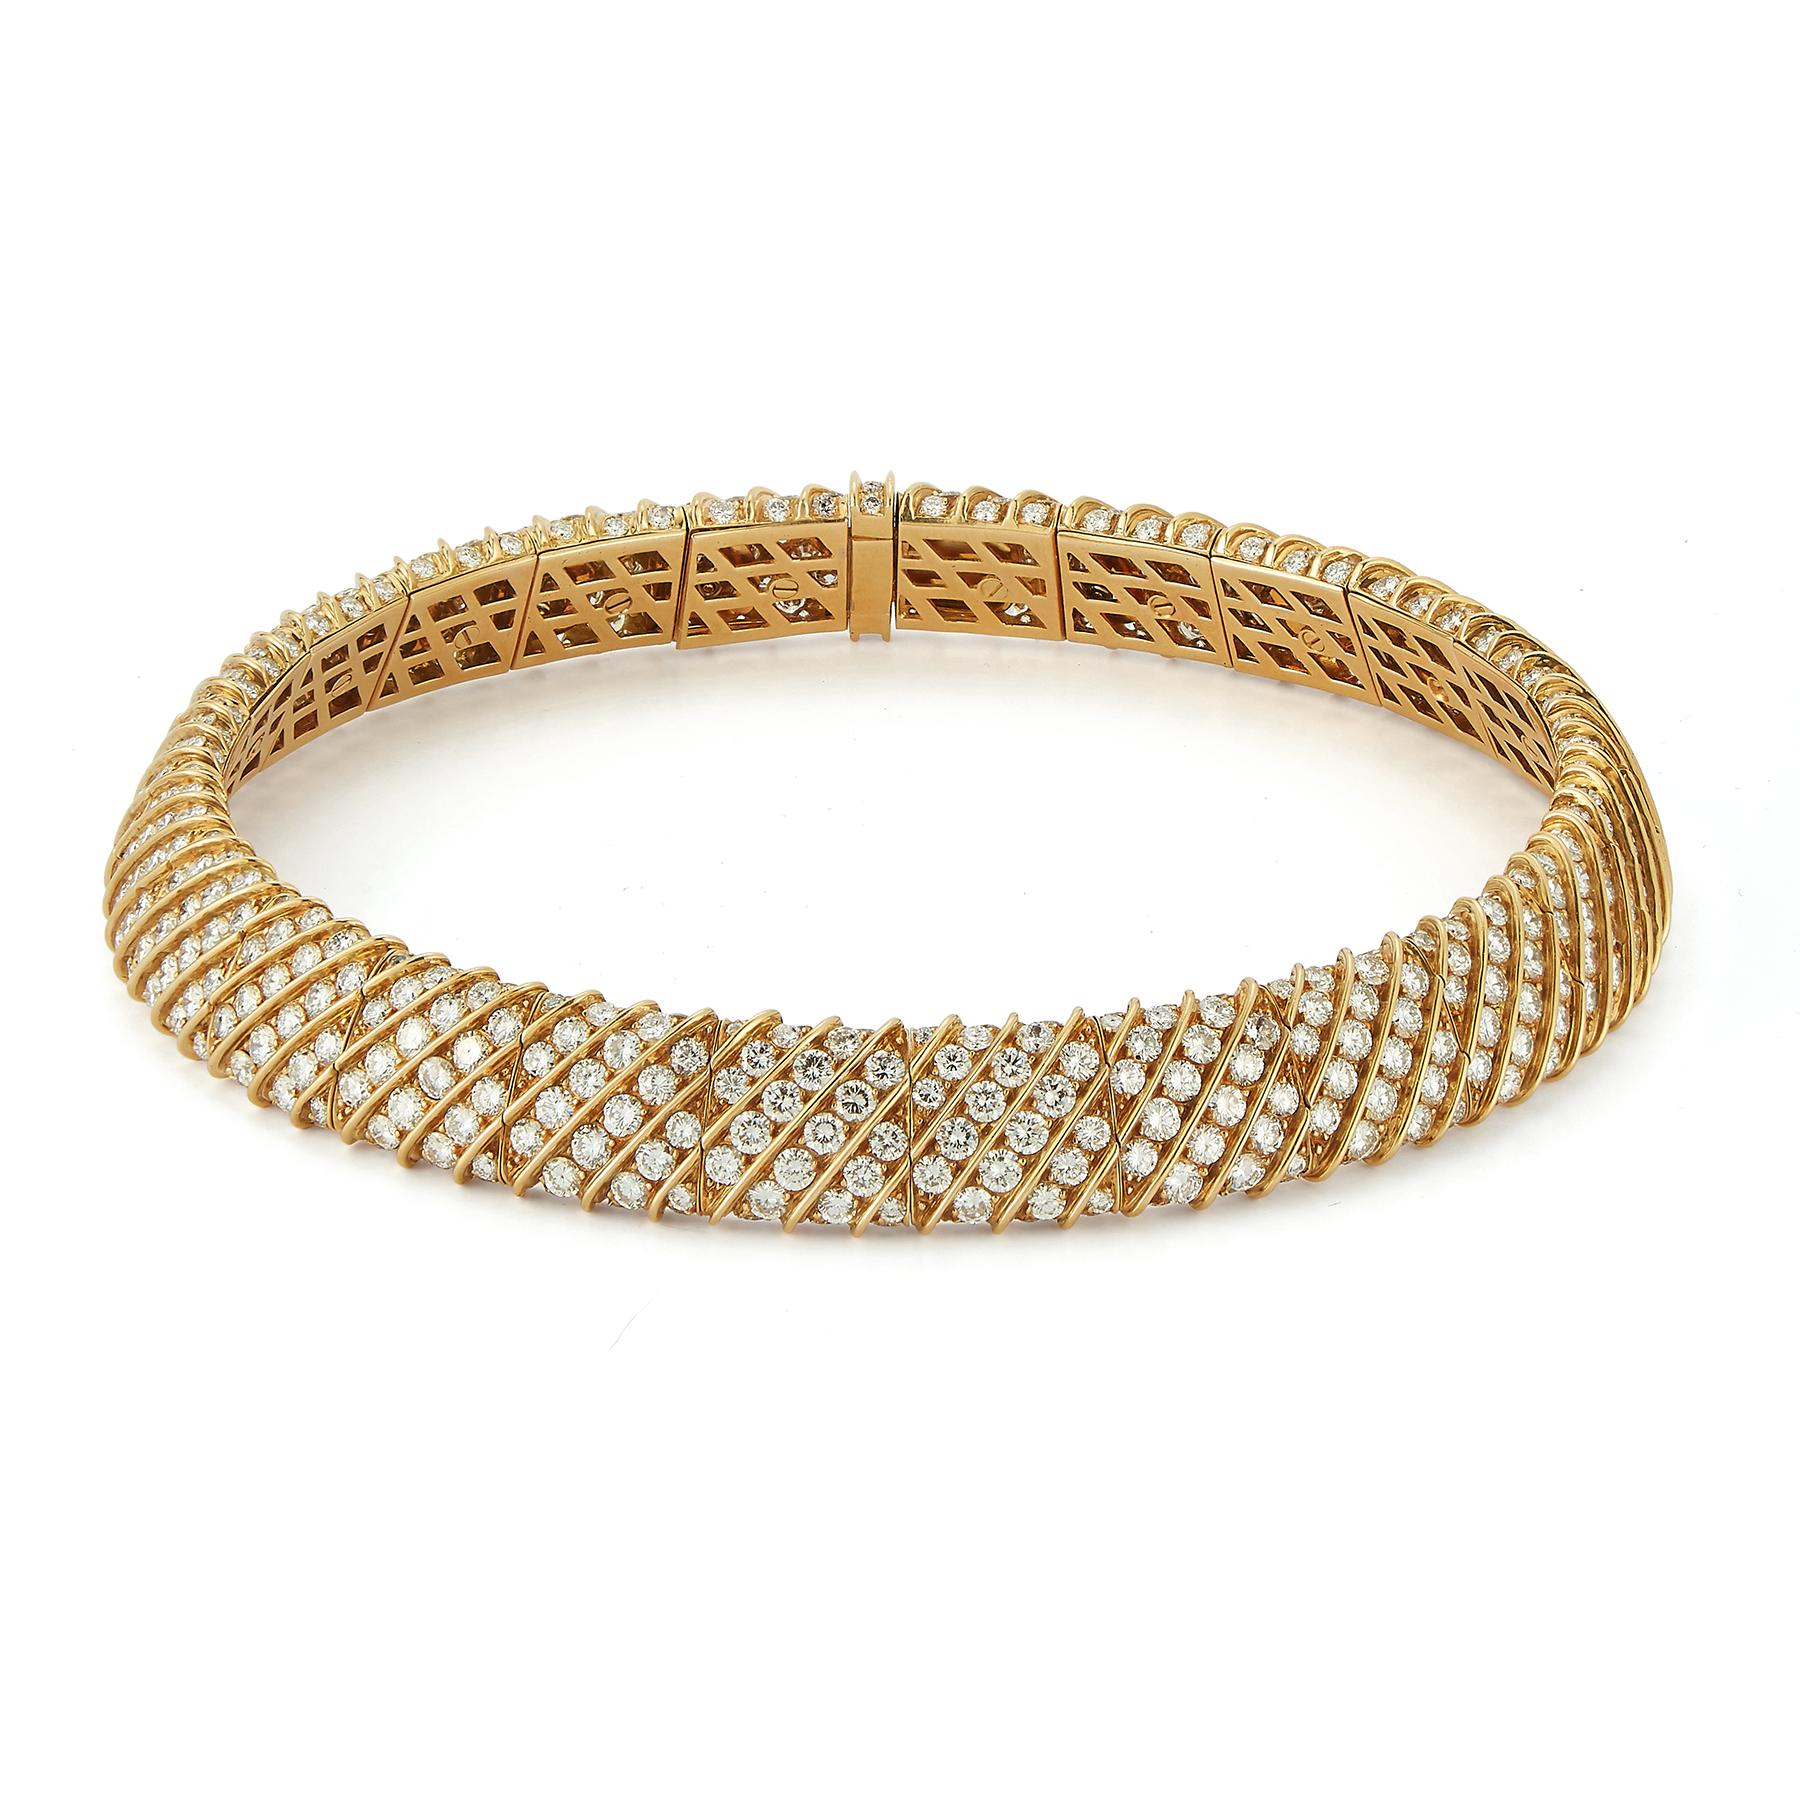 Diamond & Gold Choker Necklace

Round cut diamonds weighing: approximately 62.00 cts 

Measurements: 13